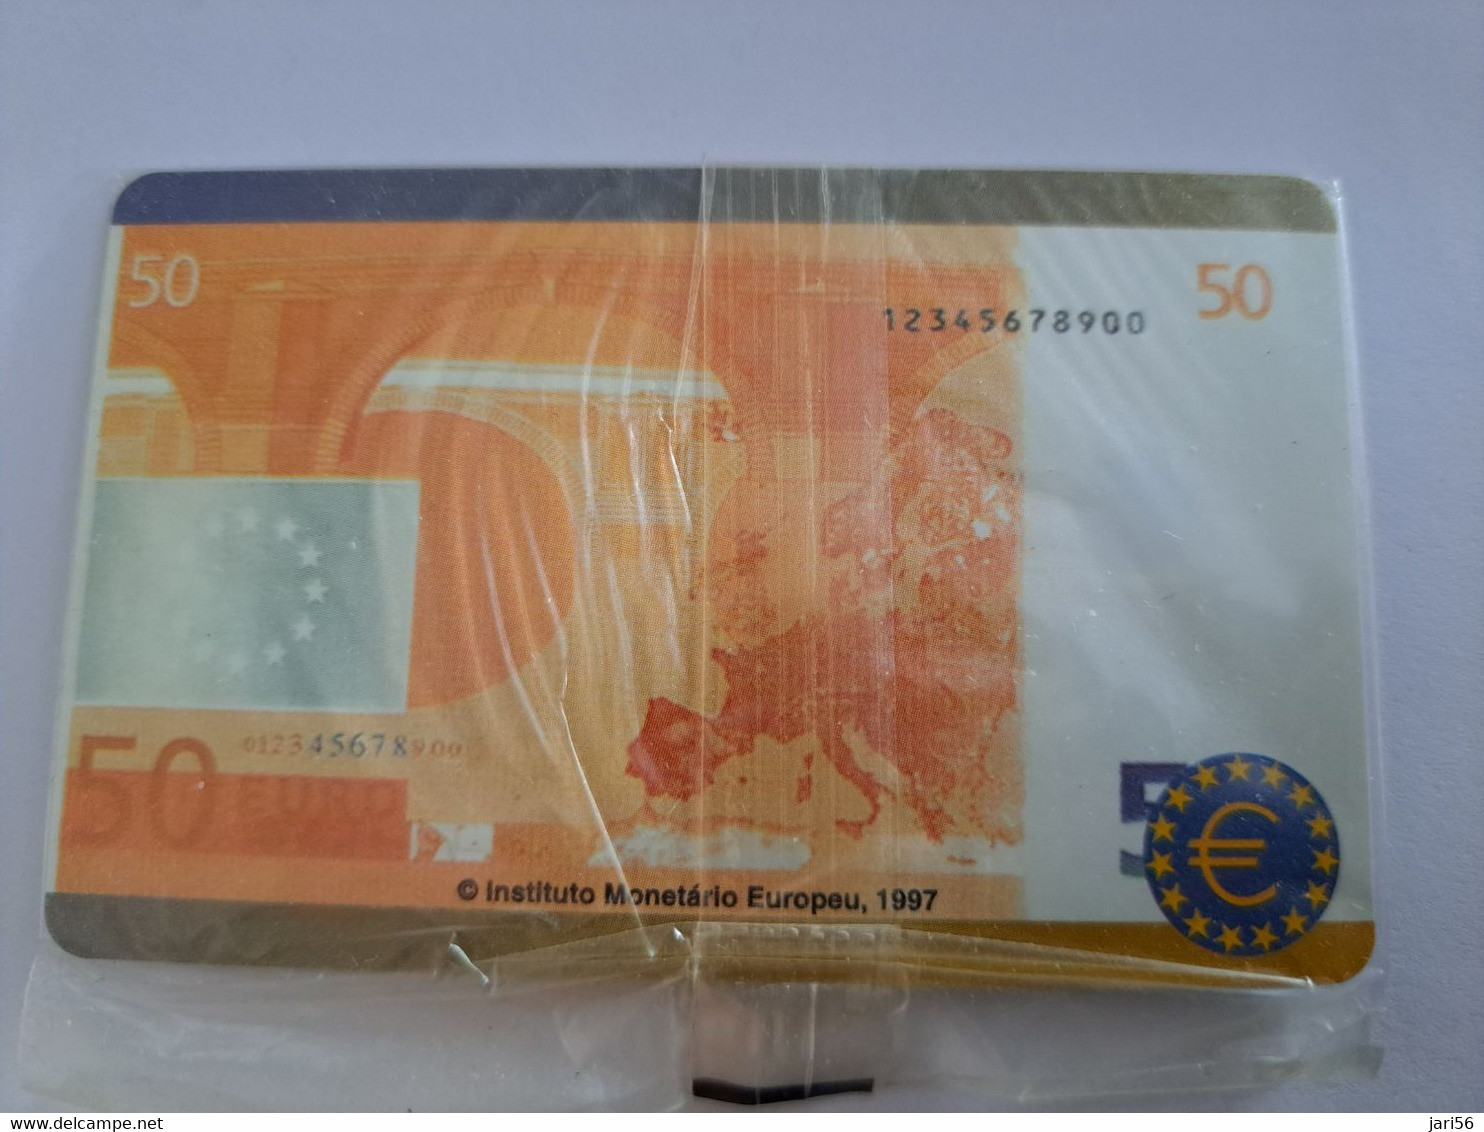 PORTUGAL   CHIPCARD 20 UNITS / BANKNOTE 50 EURO /      MINT IN WRAPPER      **10691** - Portugal